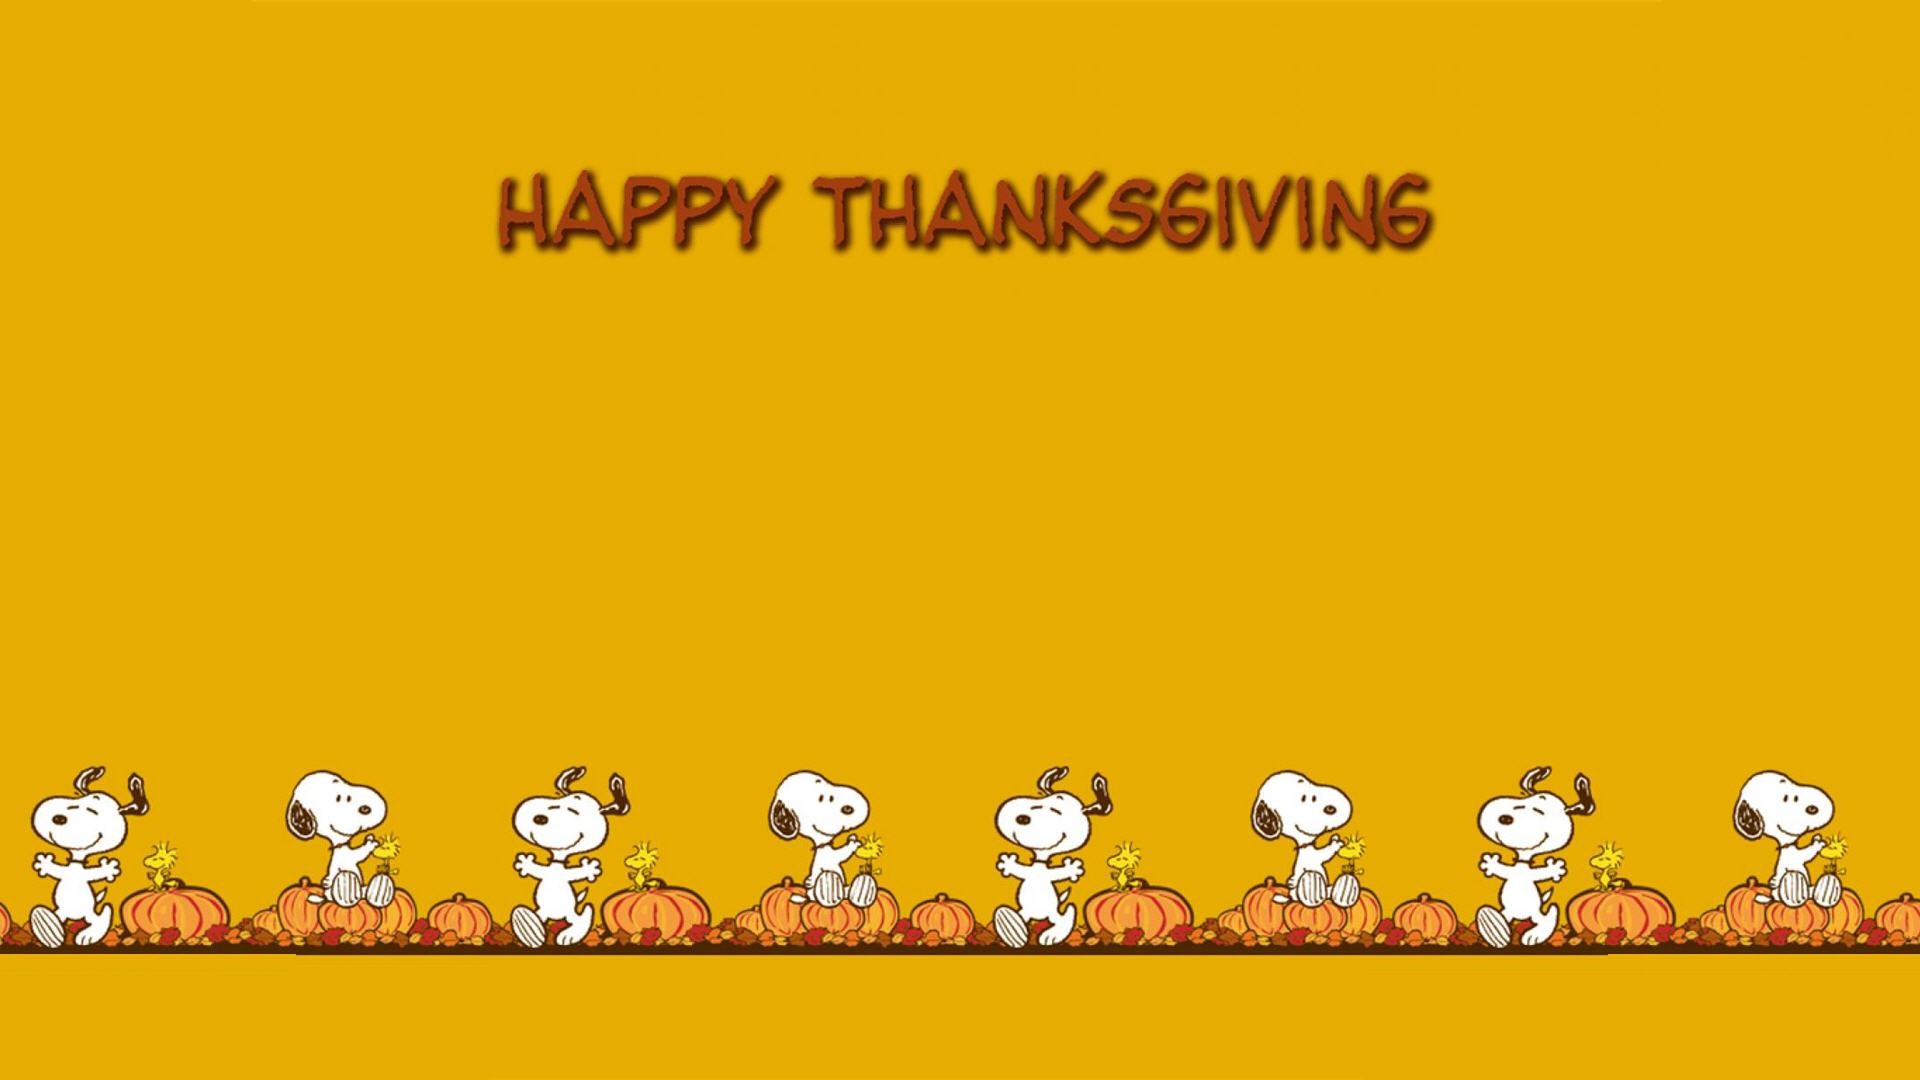 Download Snoopy getting ready to celebrate Thanksgiving Wallpaper   Wallpaperscom